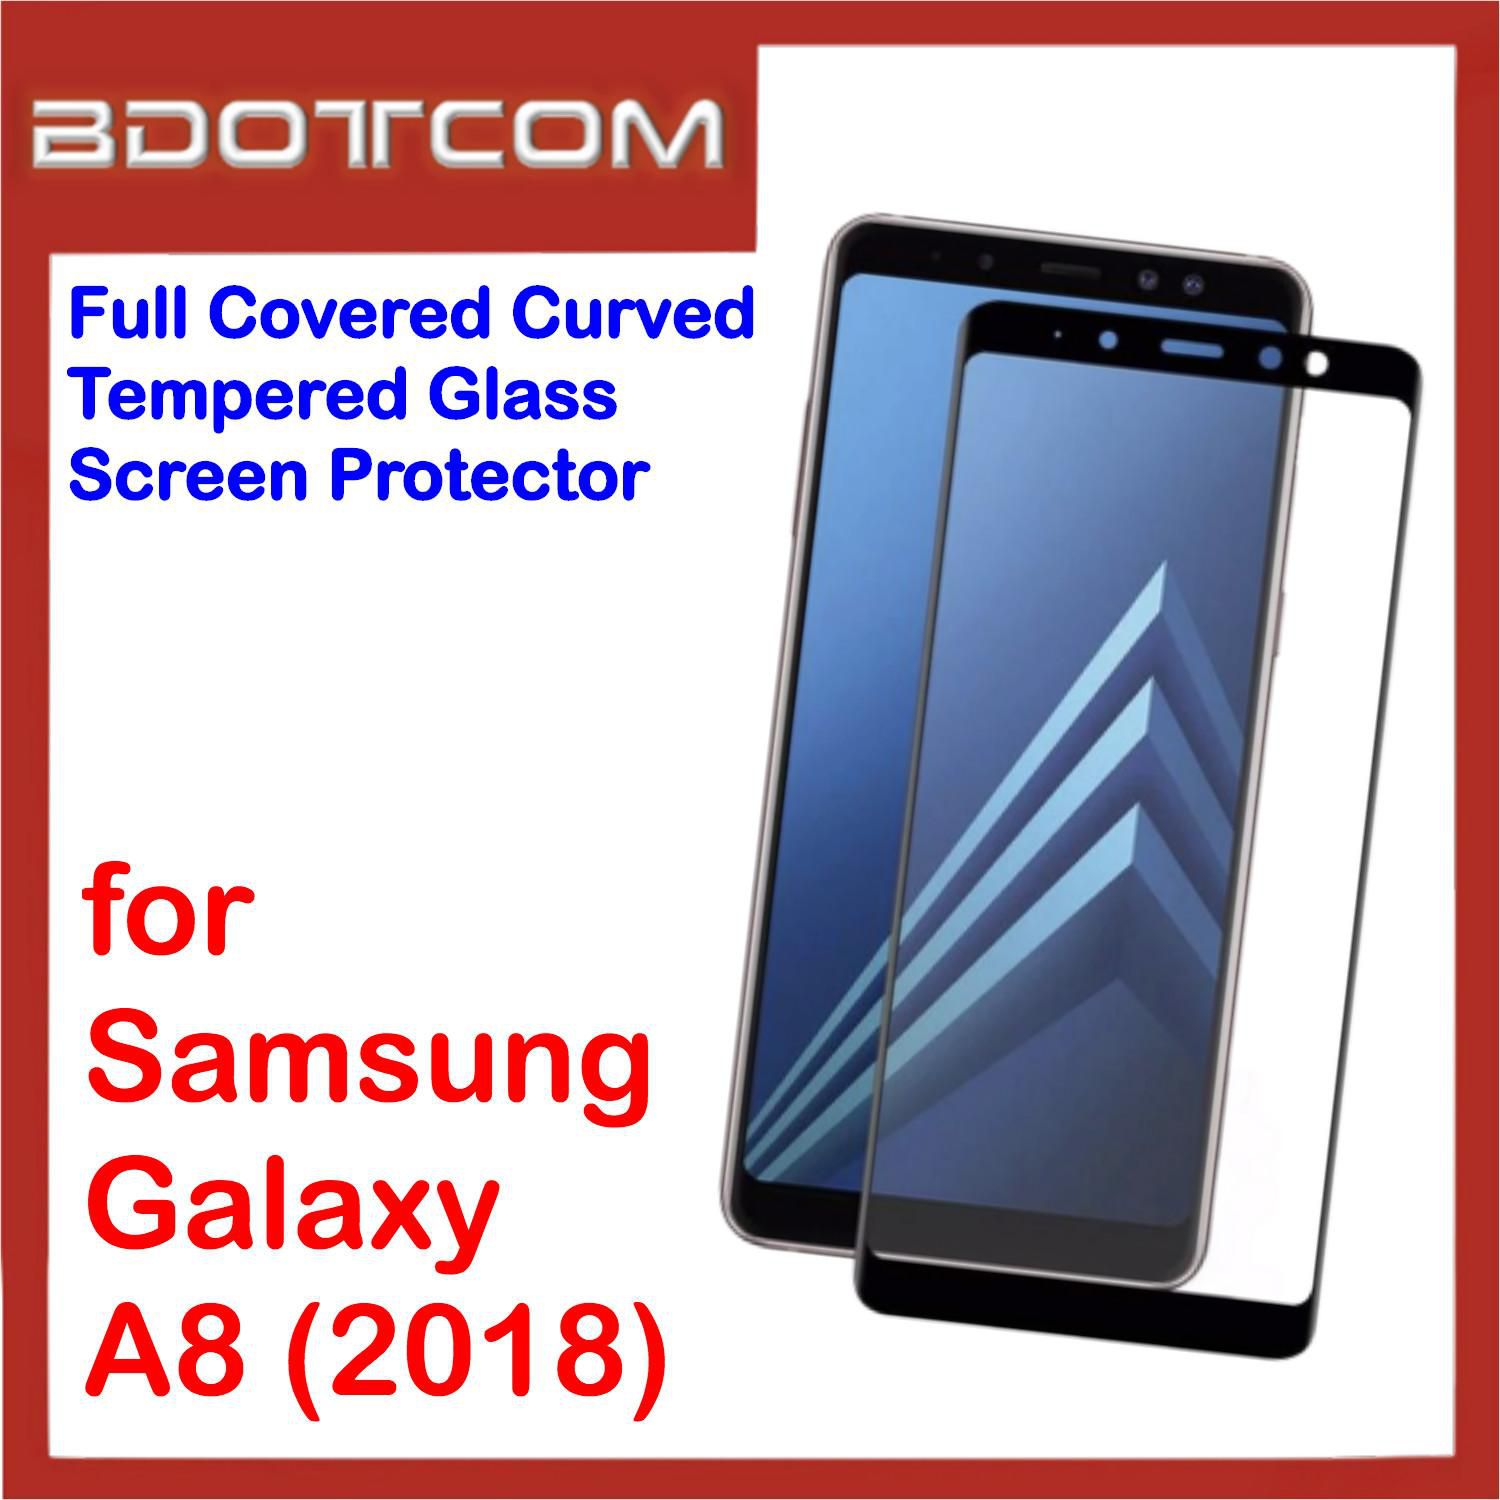 Bdotcom Full Covered Glass Screen Protector for Samsung Galaxy A8  (Black)